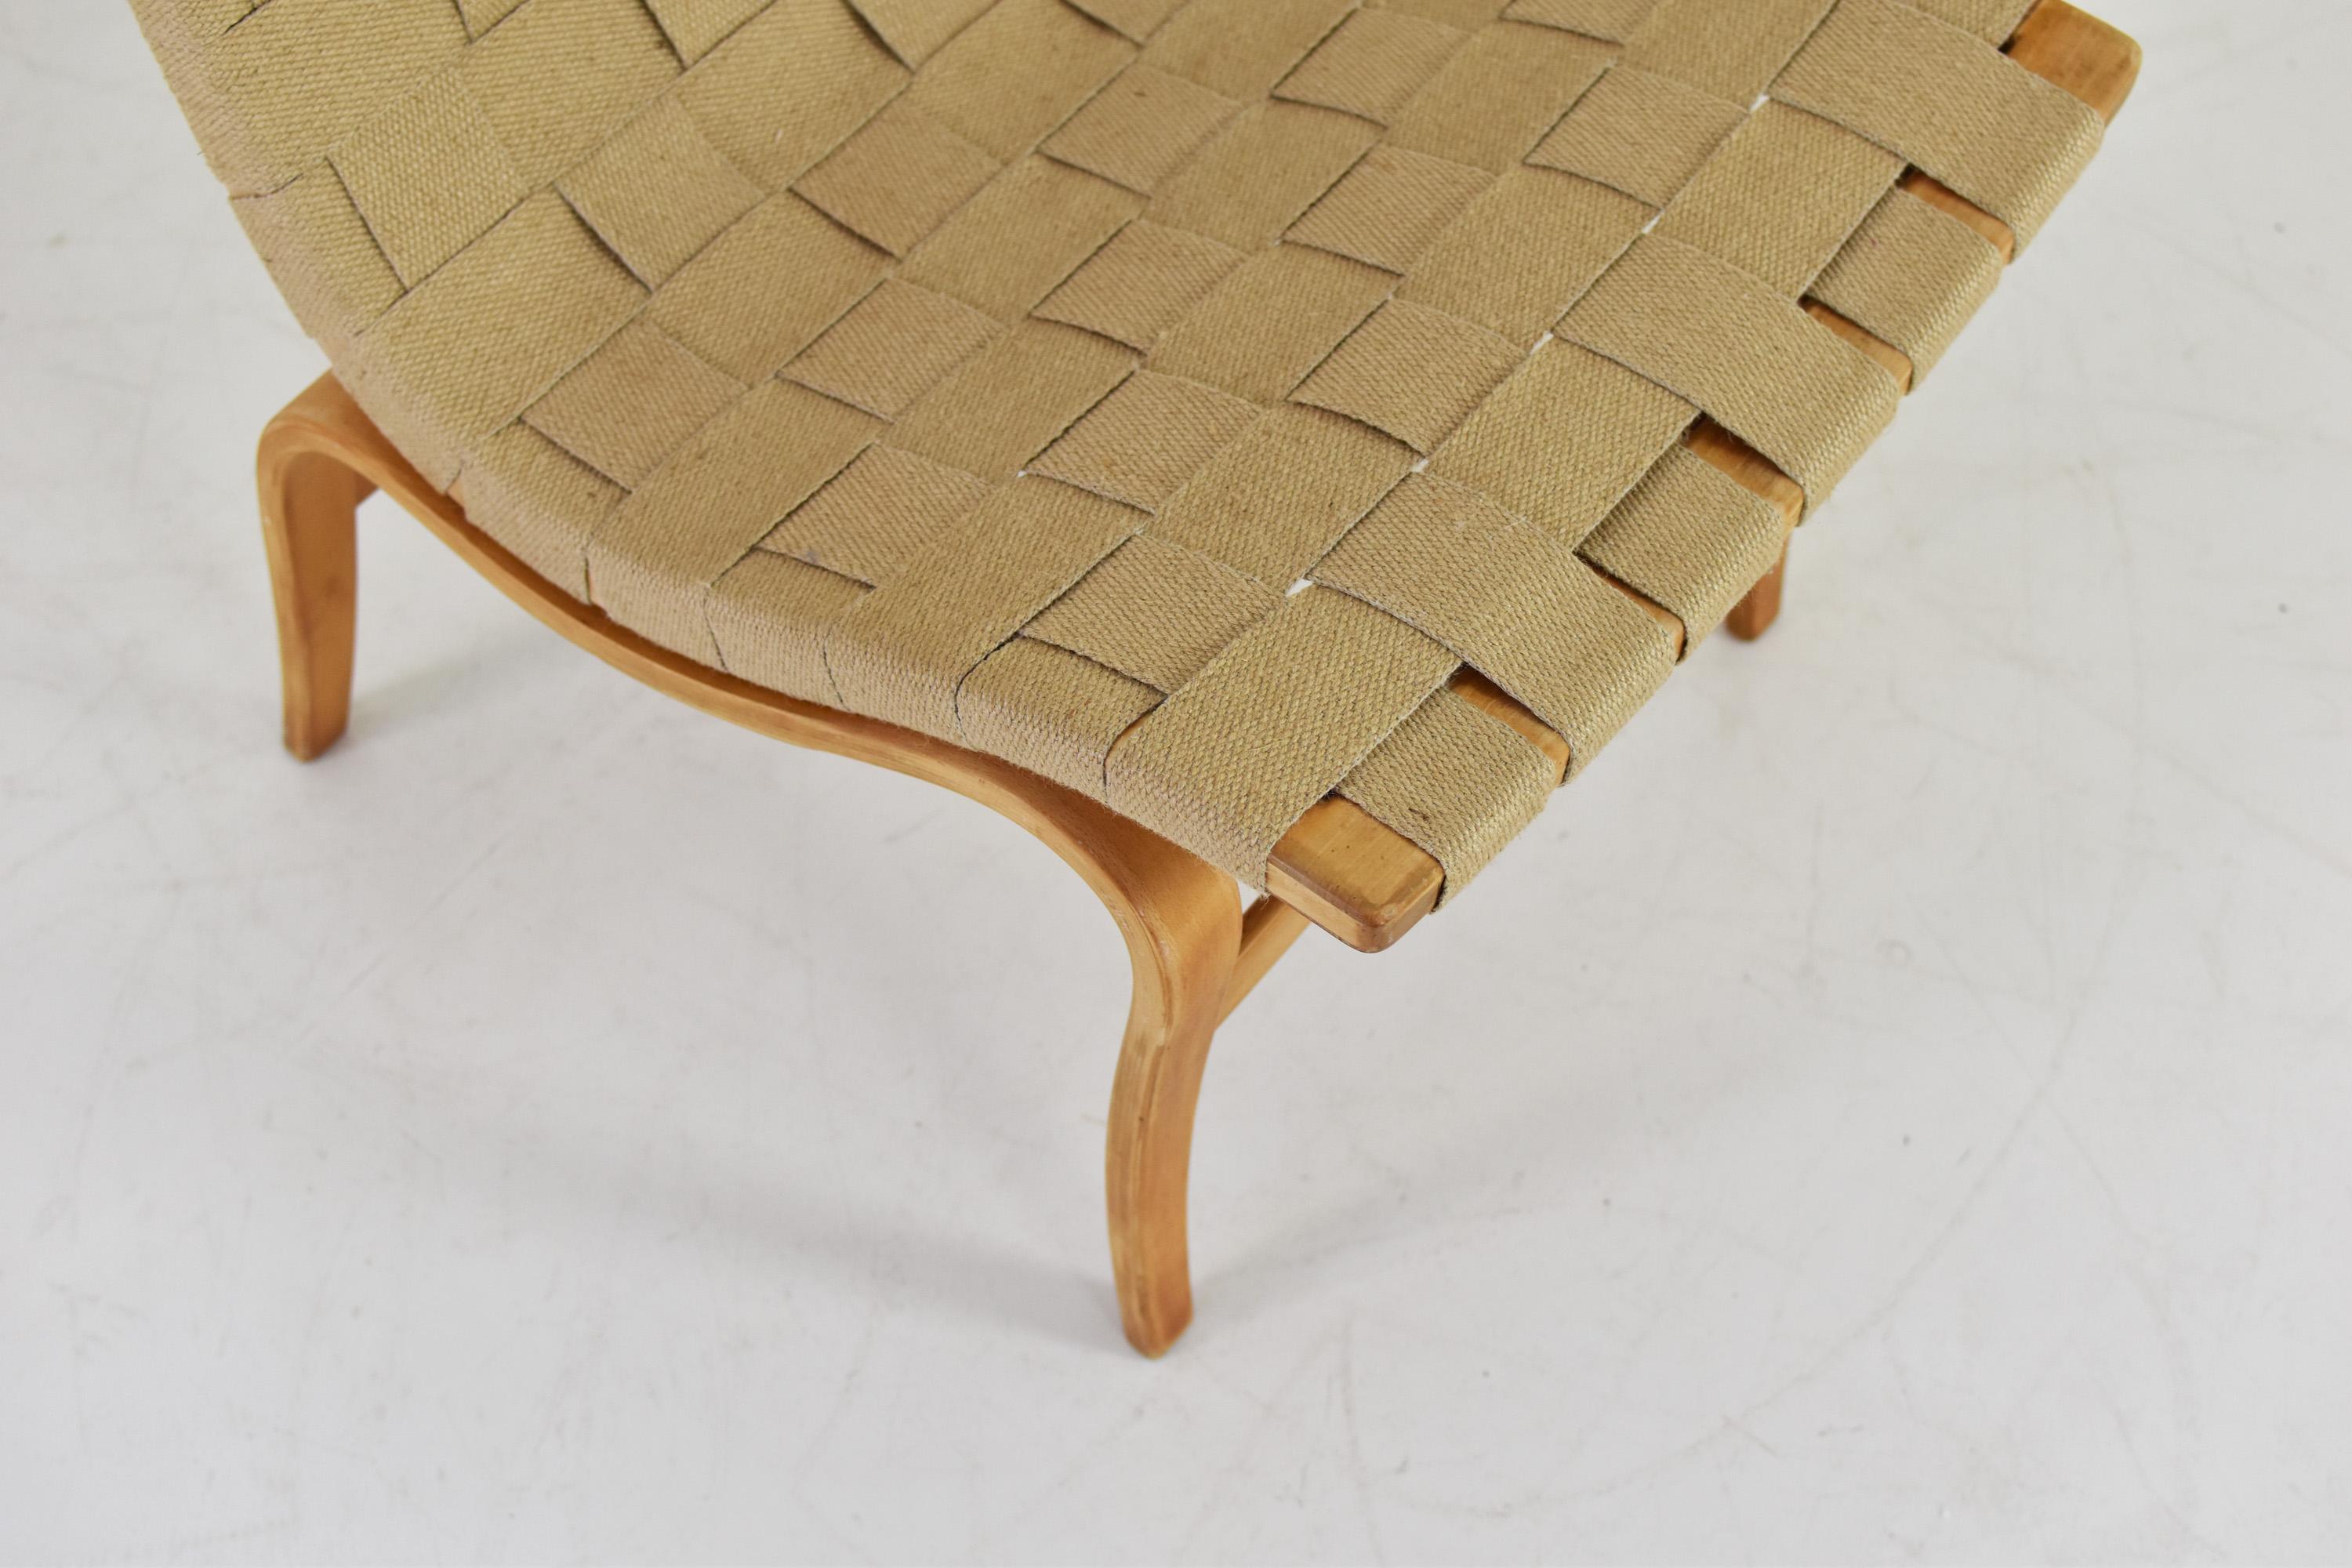 Hemp Early Edition ‘Eva’ Side Chair by Bruno Mathsson for Karl Mathsson, Sweden 1960s For Sale